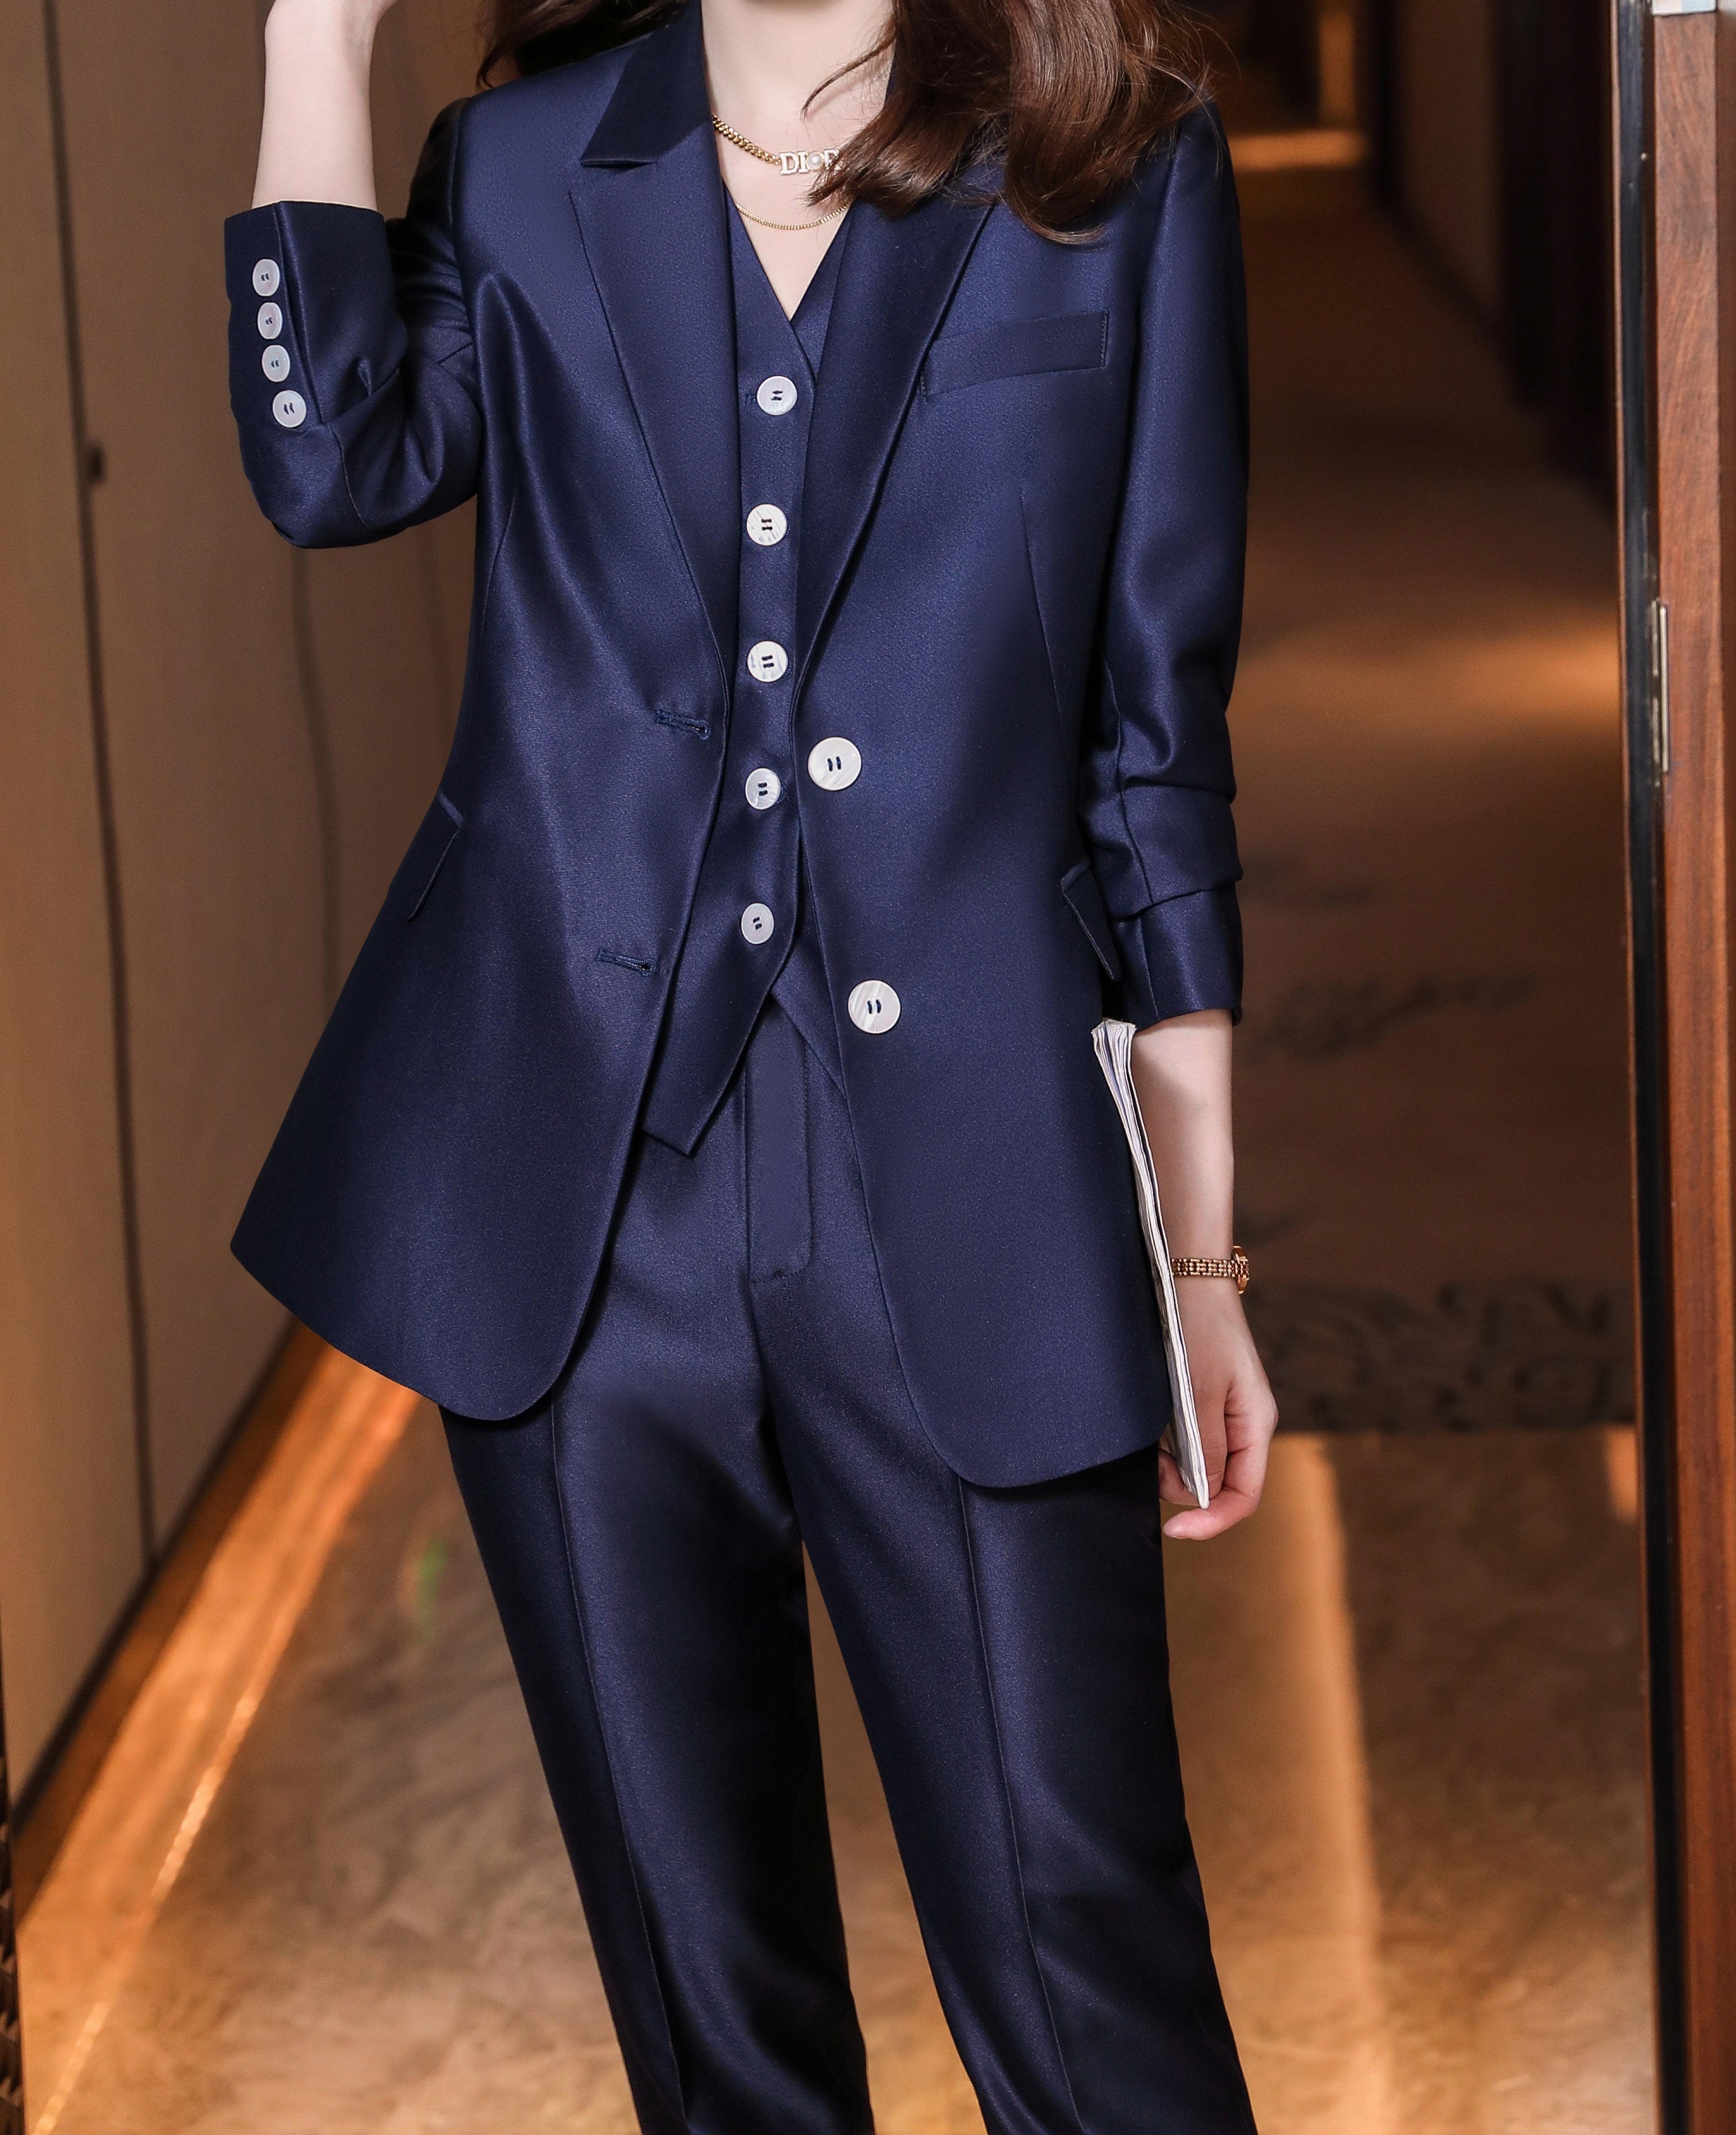 Navy blue 3-piece satin suit, dark blue suits with blazer, waistcoat and pants